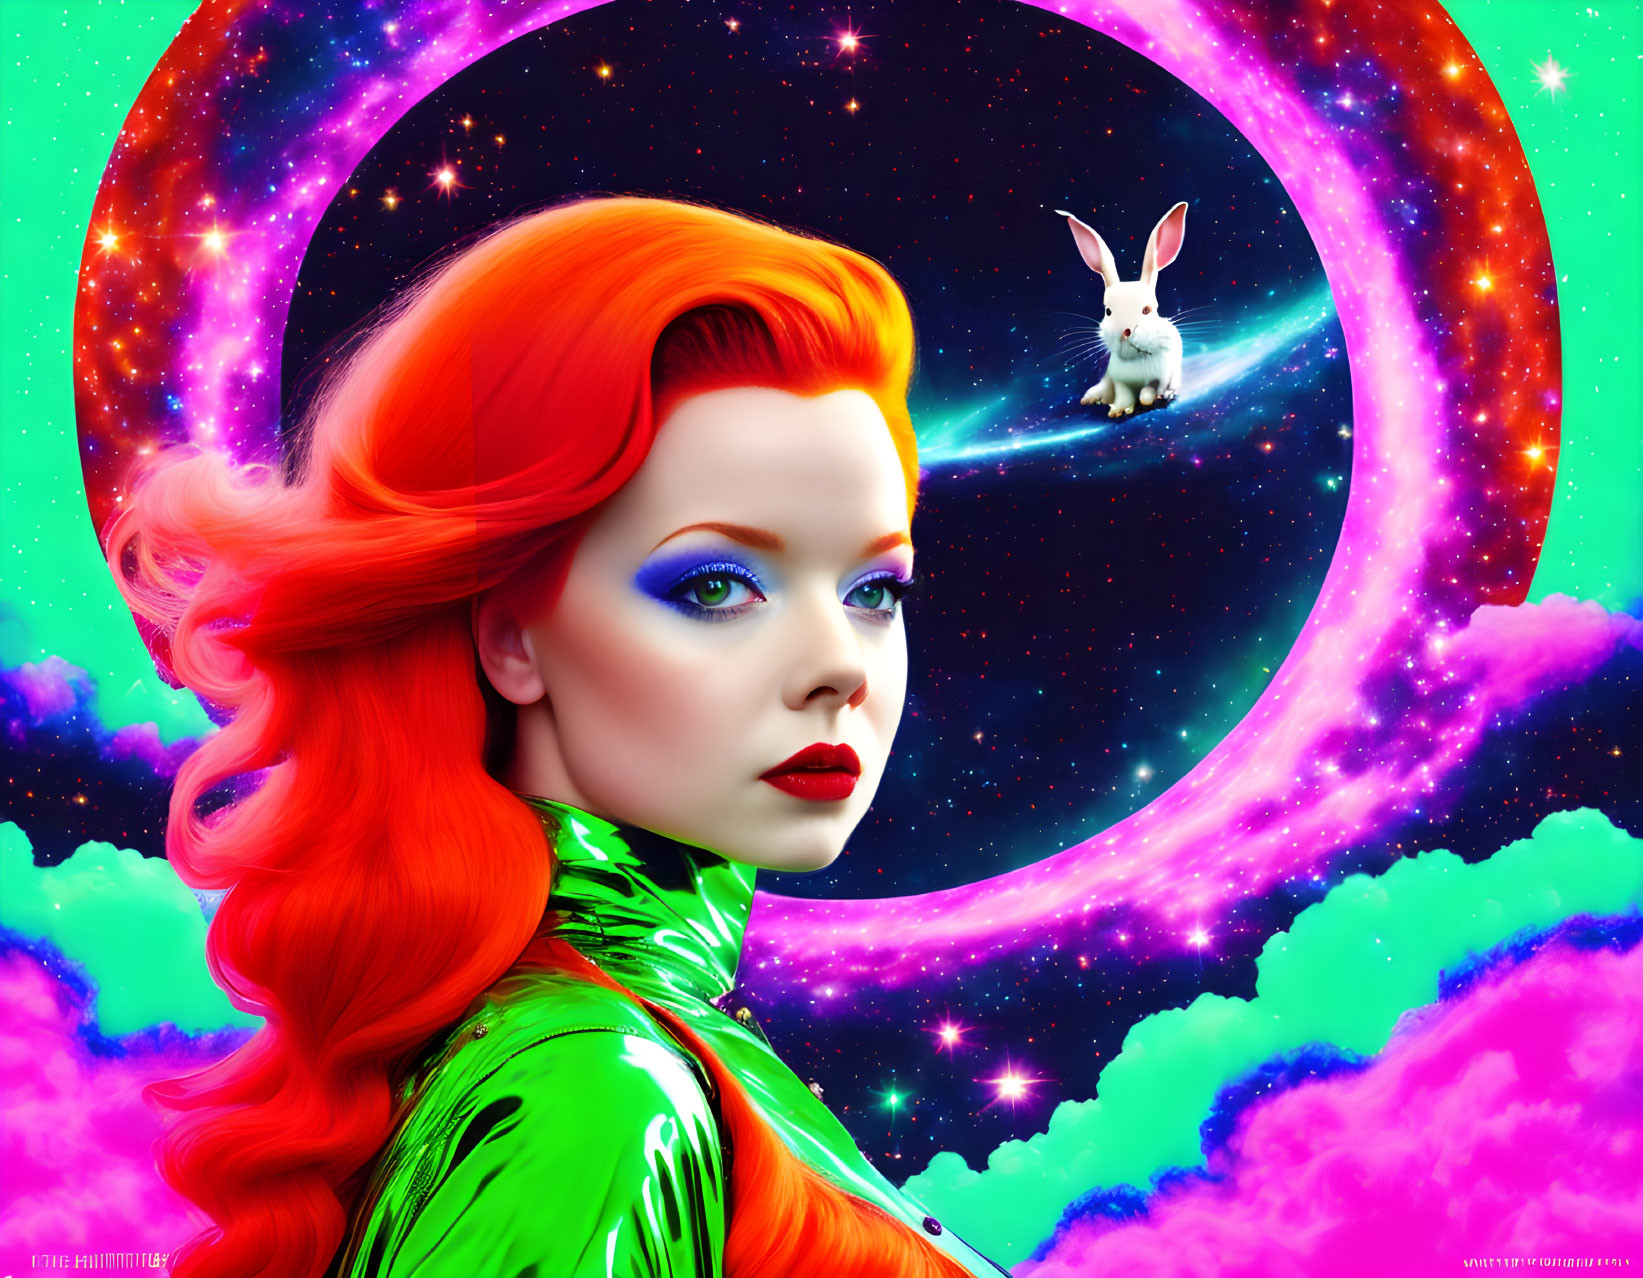 Surreal portrait of woman with red hair and blue eyes in cosmic setting